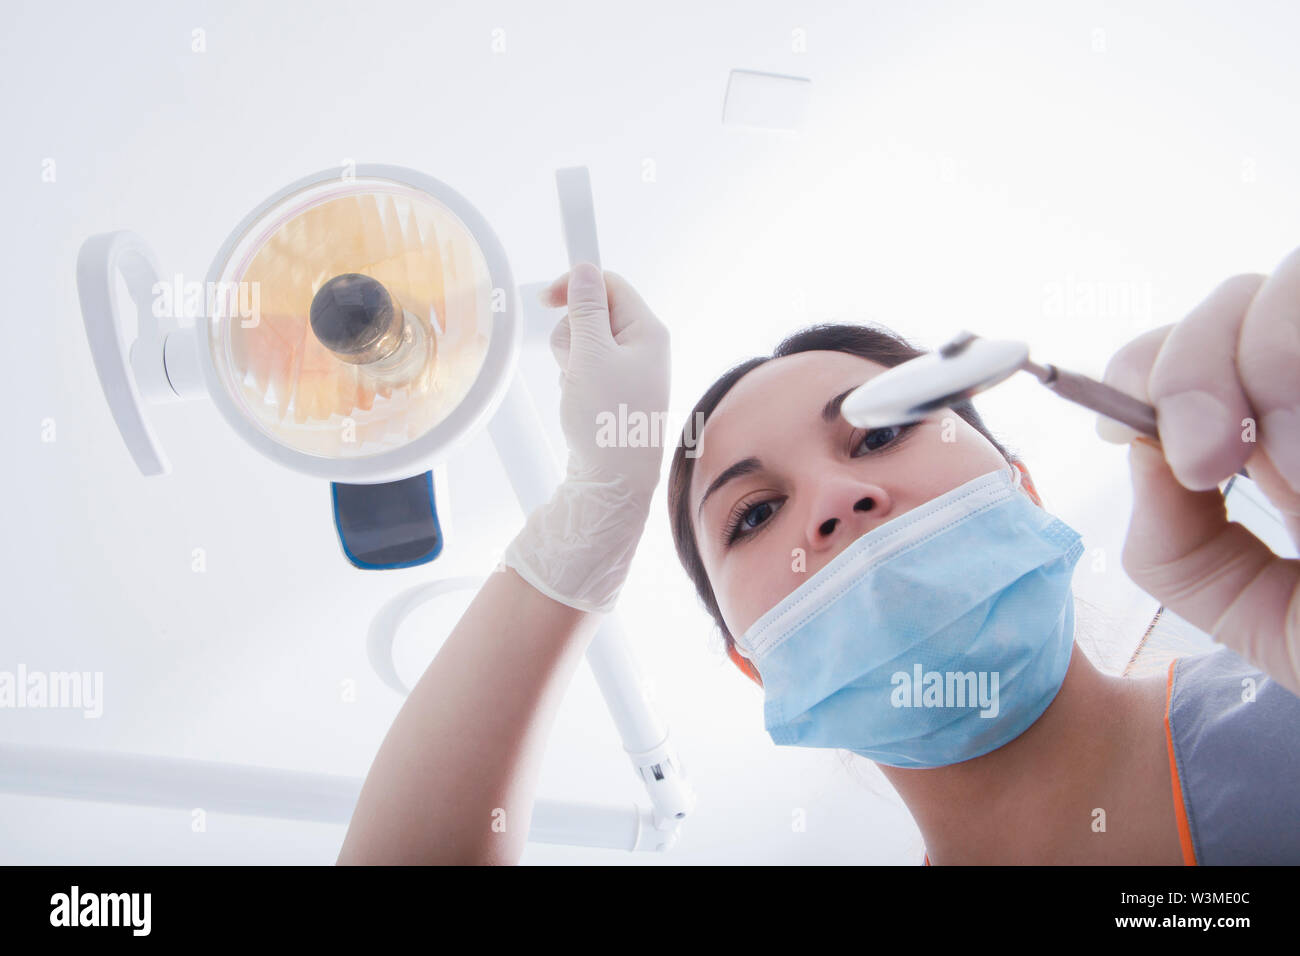 View directly below dental hygienist during examination Stock Photo